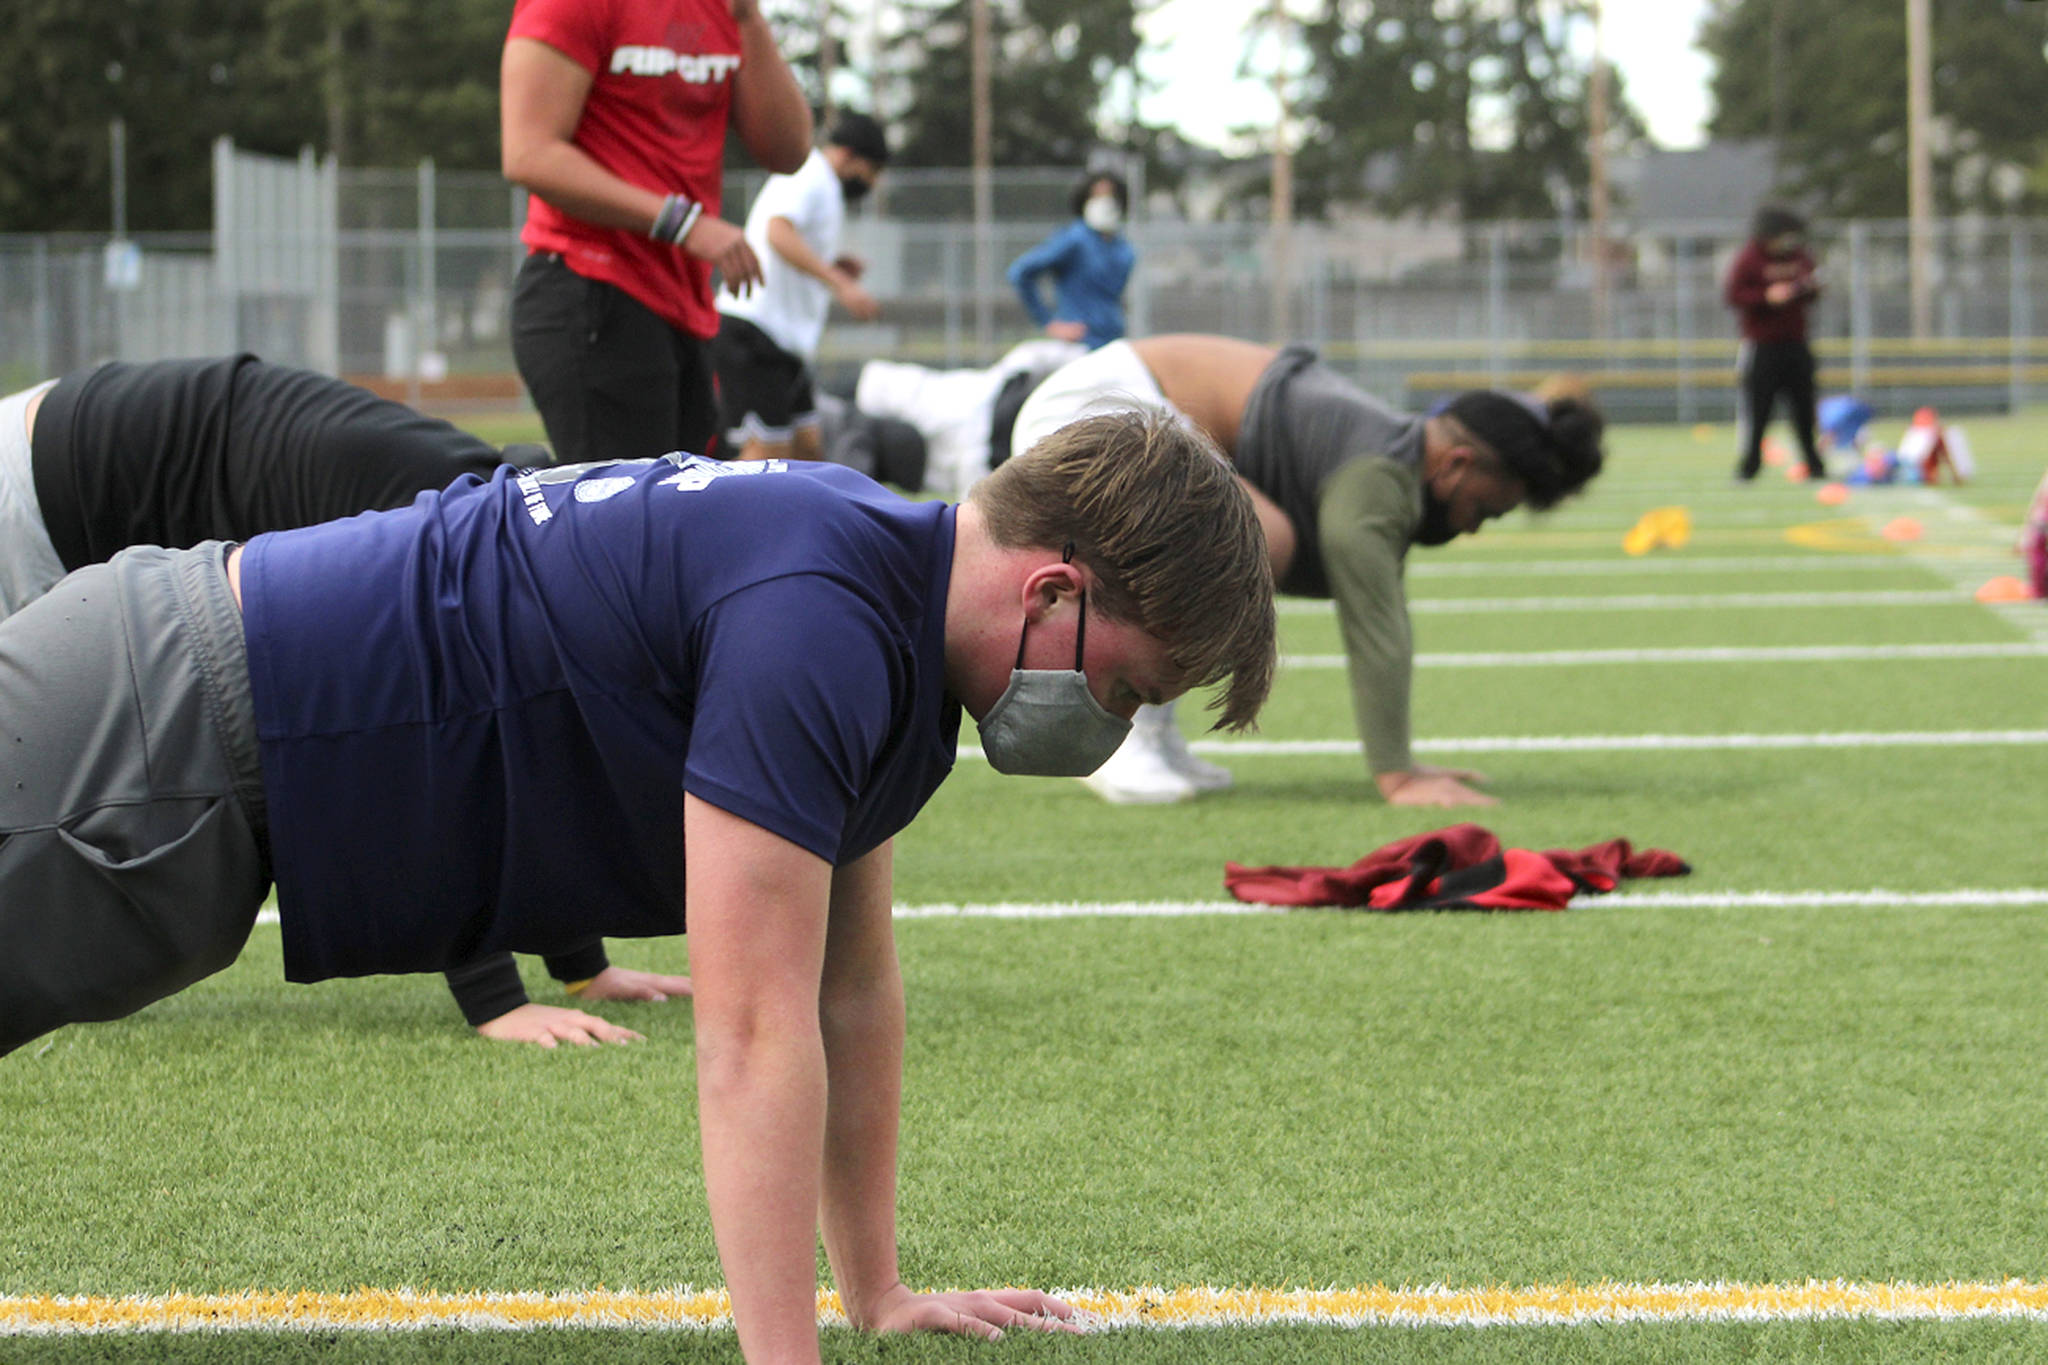 A Decatur High School student in Federal Way participates in a conditioning workout in Feb. 2021 as the state eased back in to in-person activities. Olivia Sullivan/Sound Publishing